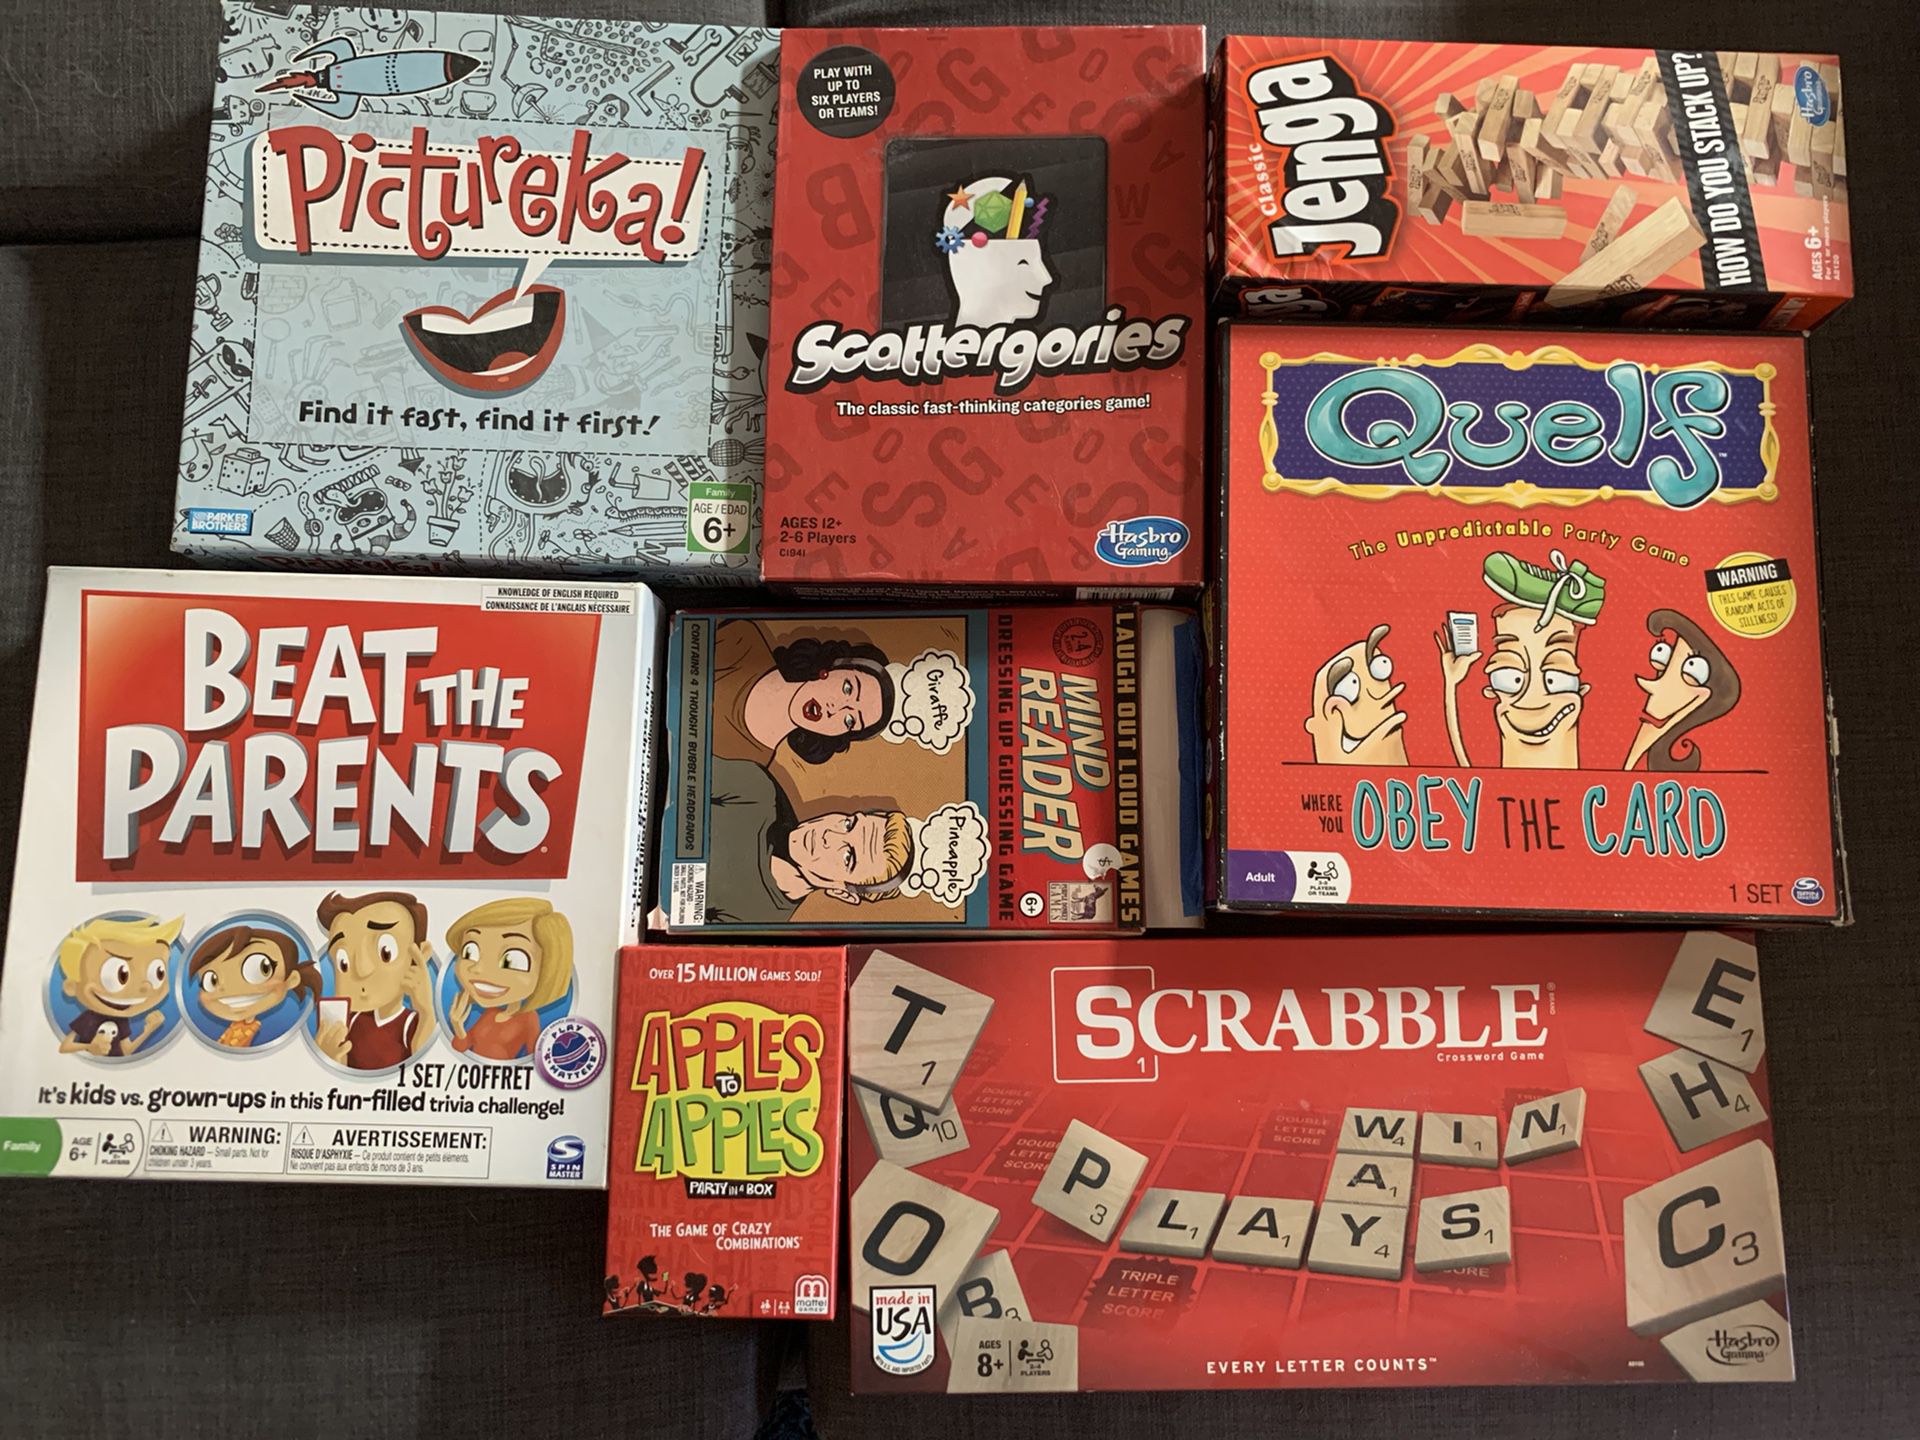 Board games - Apples to Apples, Scrabble, Scattergories, Jenga and more